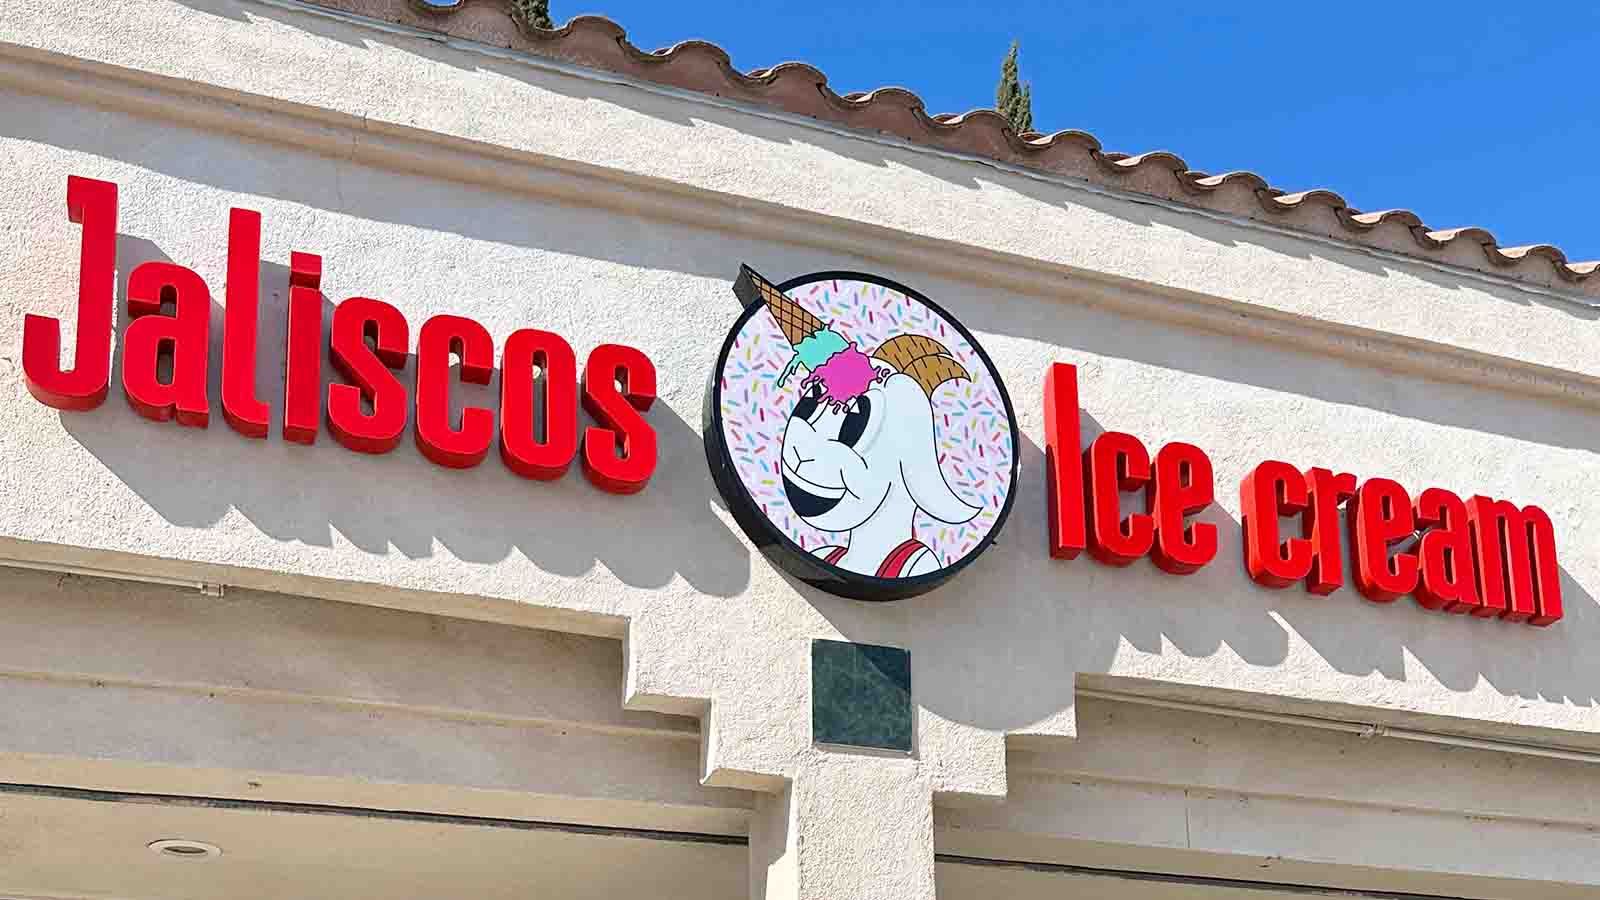 Jaliscos Ice Cream modern signs mounted on the facade